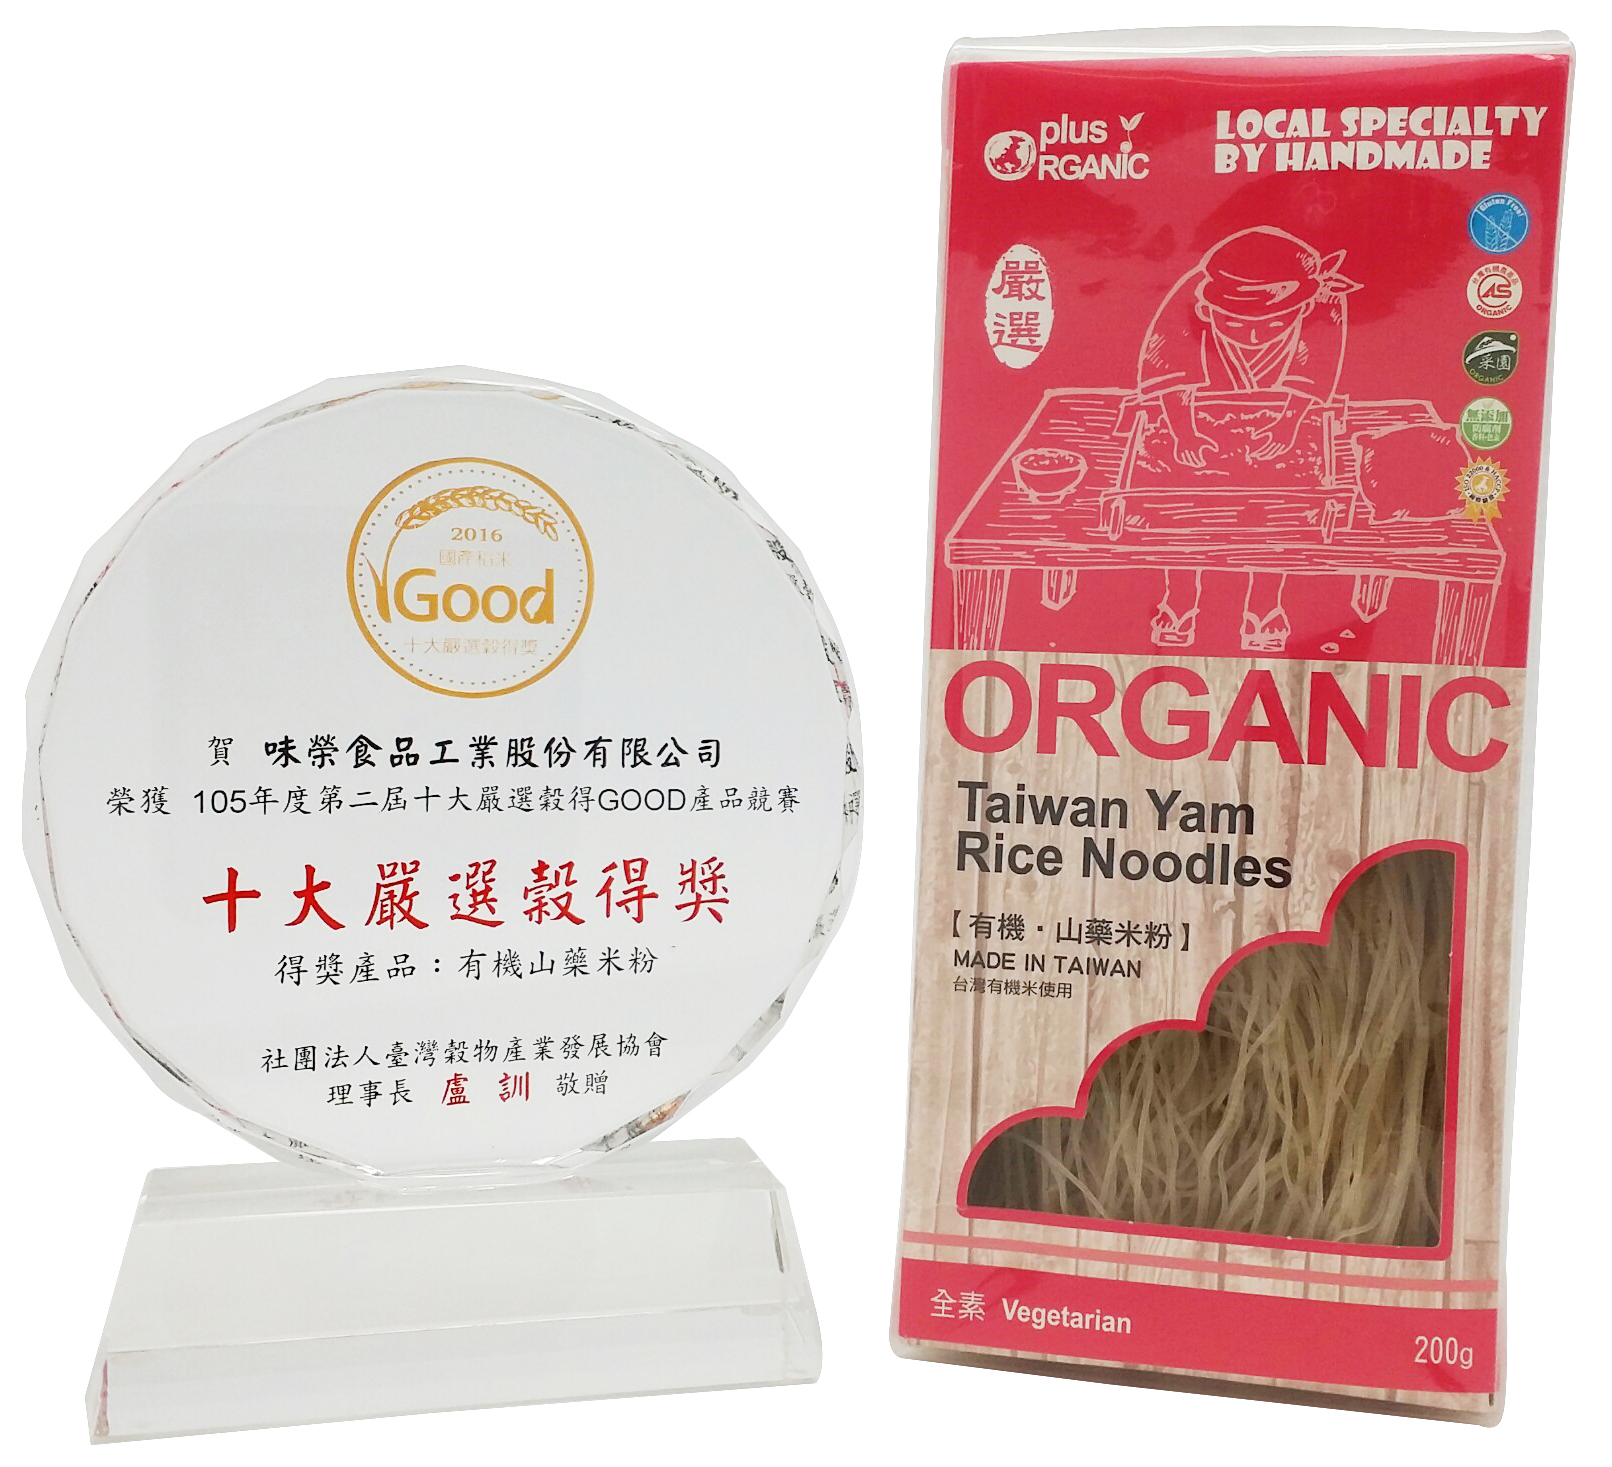 [Organic yam rice noodles] passed the evaluation of the Agricultural and Food Administration of the Executive Yuan Committee of Agriculture and was selected as the second "Top Ten Strictly Selected Good Valley Award Winners" in 2016